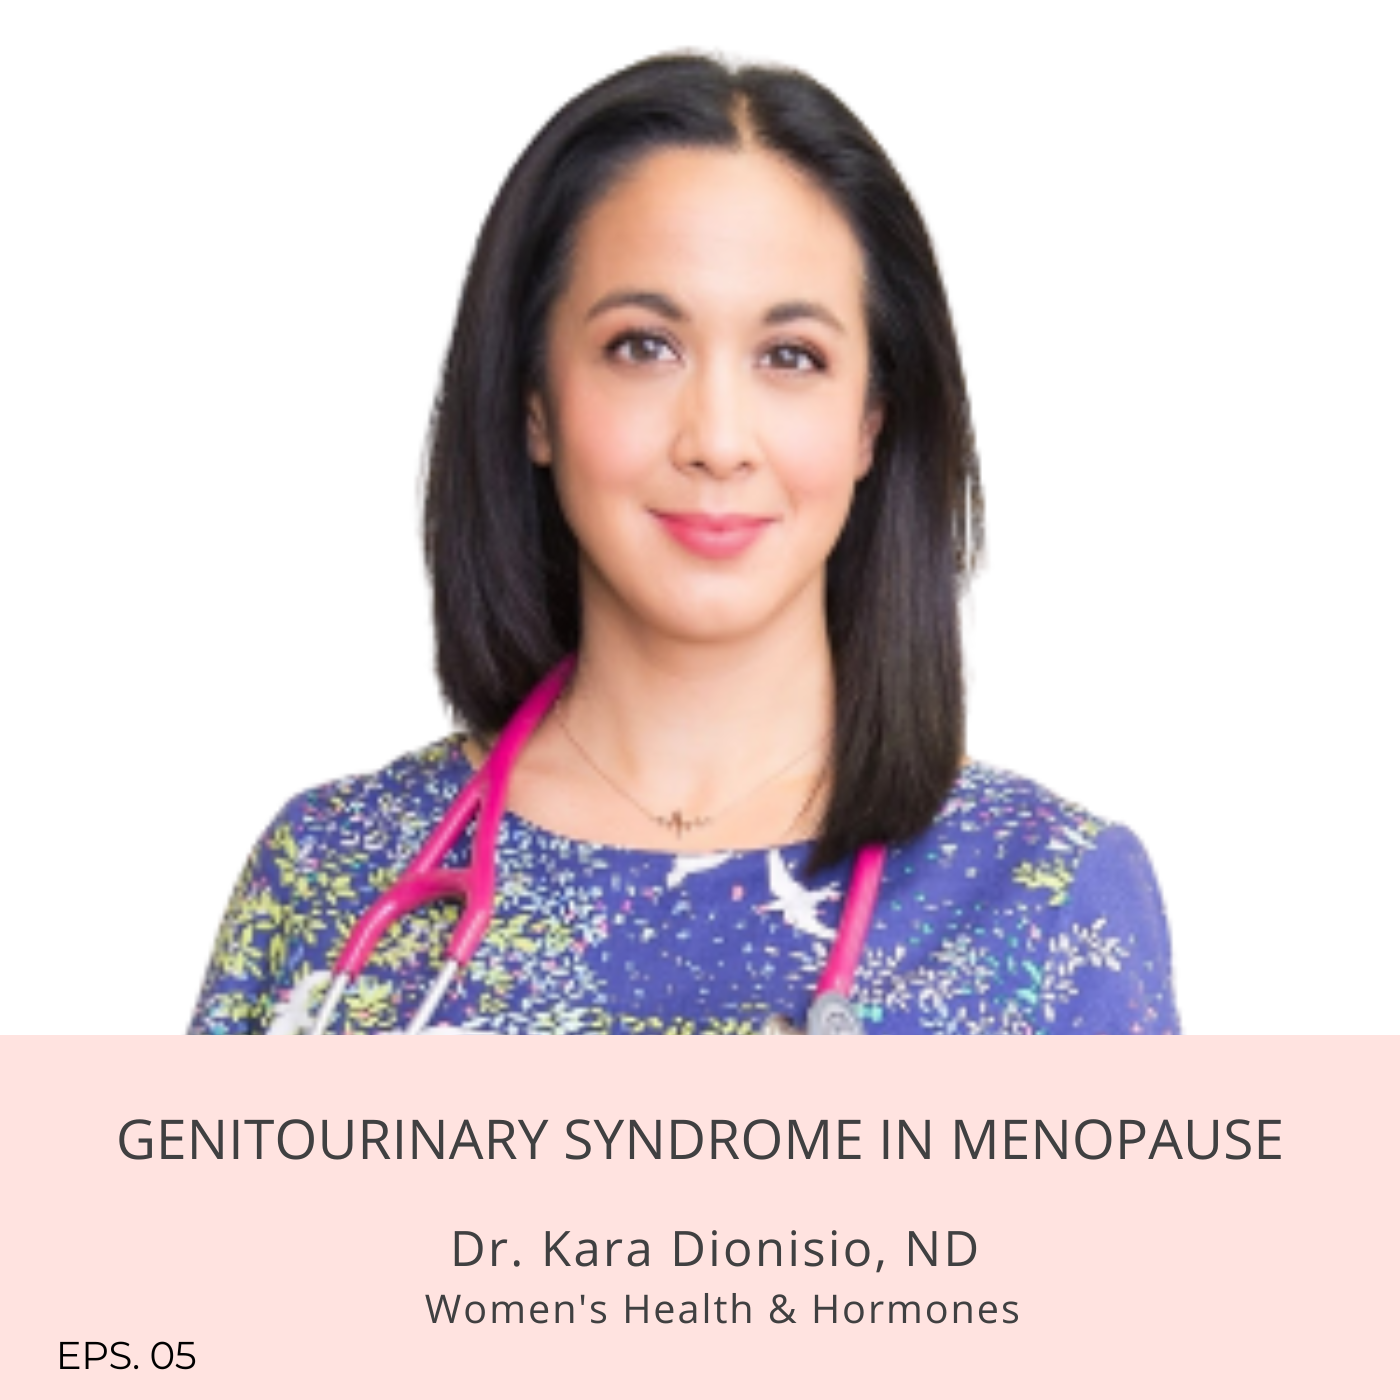 Episode 5: Genitourinary Syndrome in Menopause with Dr. Kara Dionisio, ND